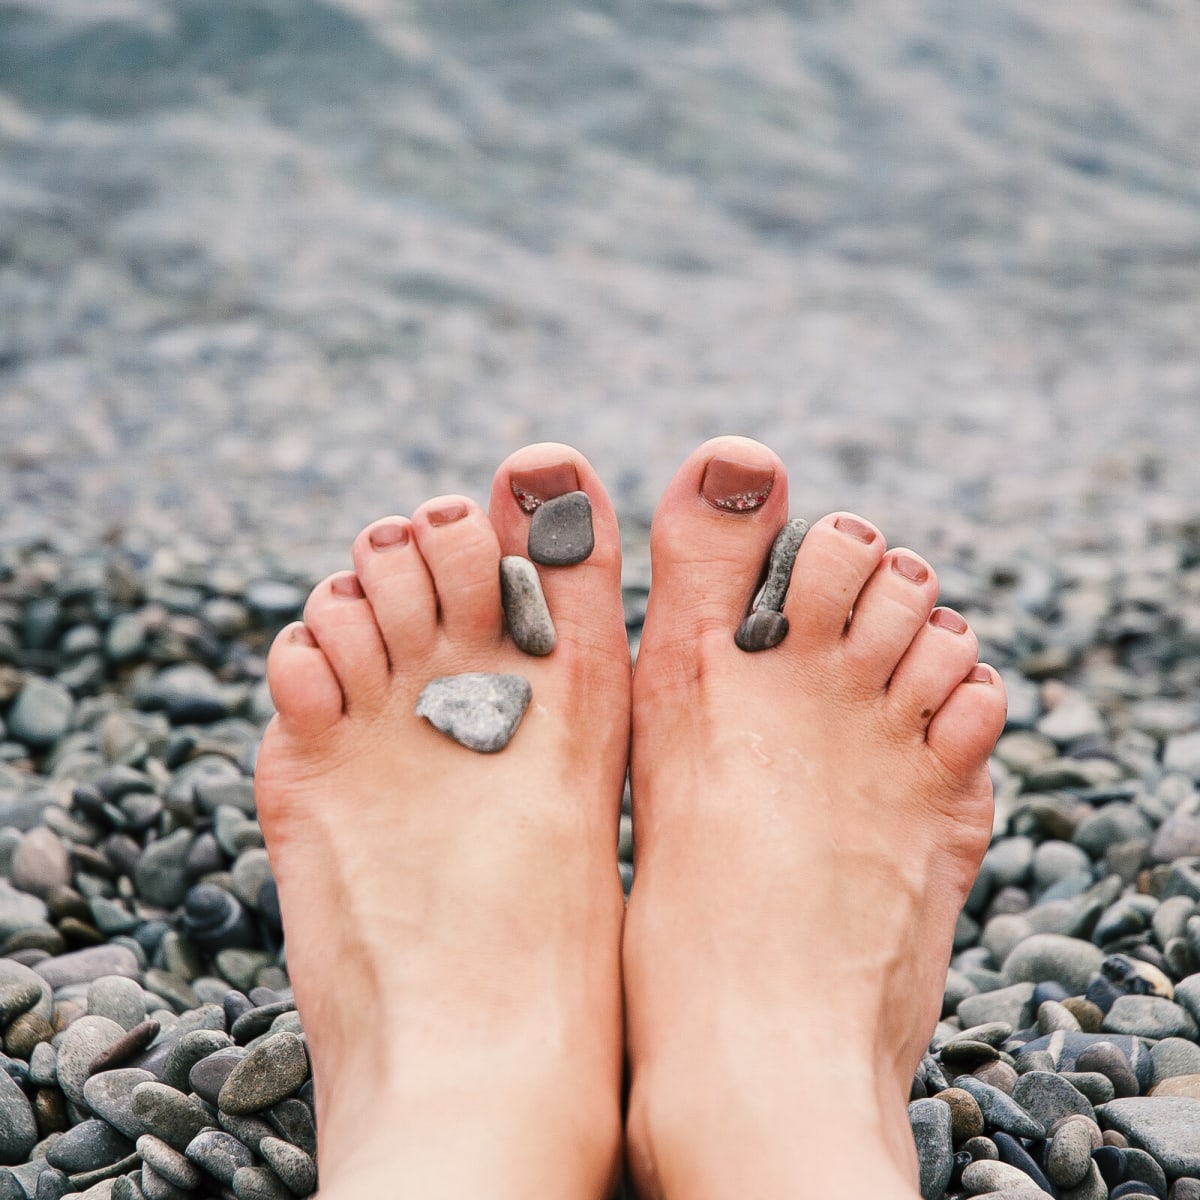 How to have healthy feet in the summer